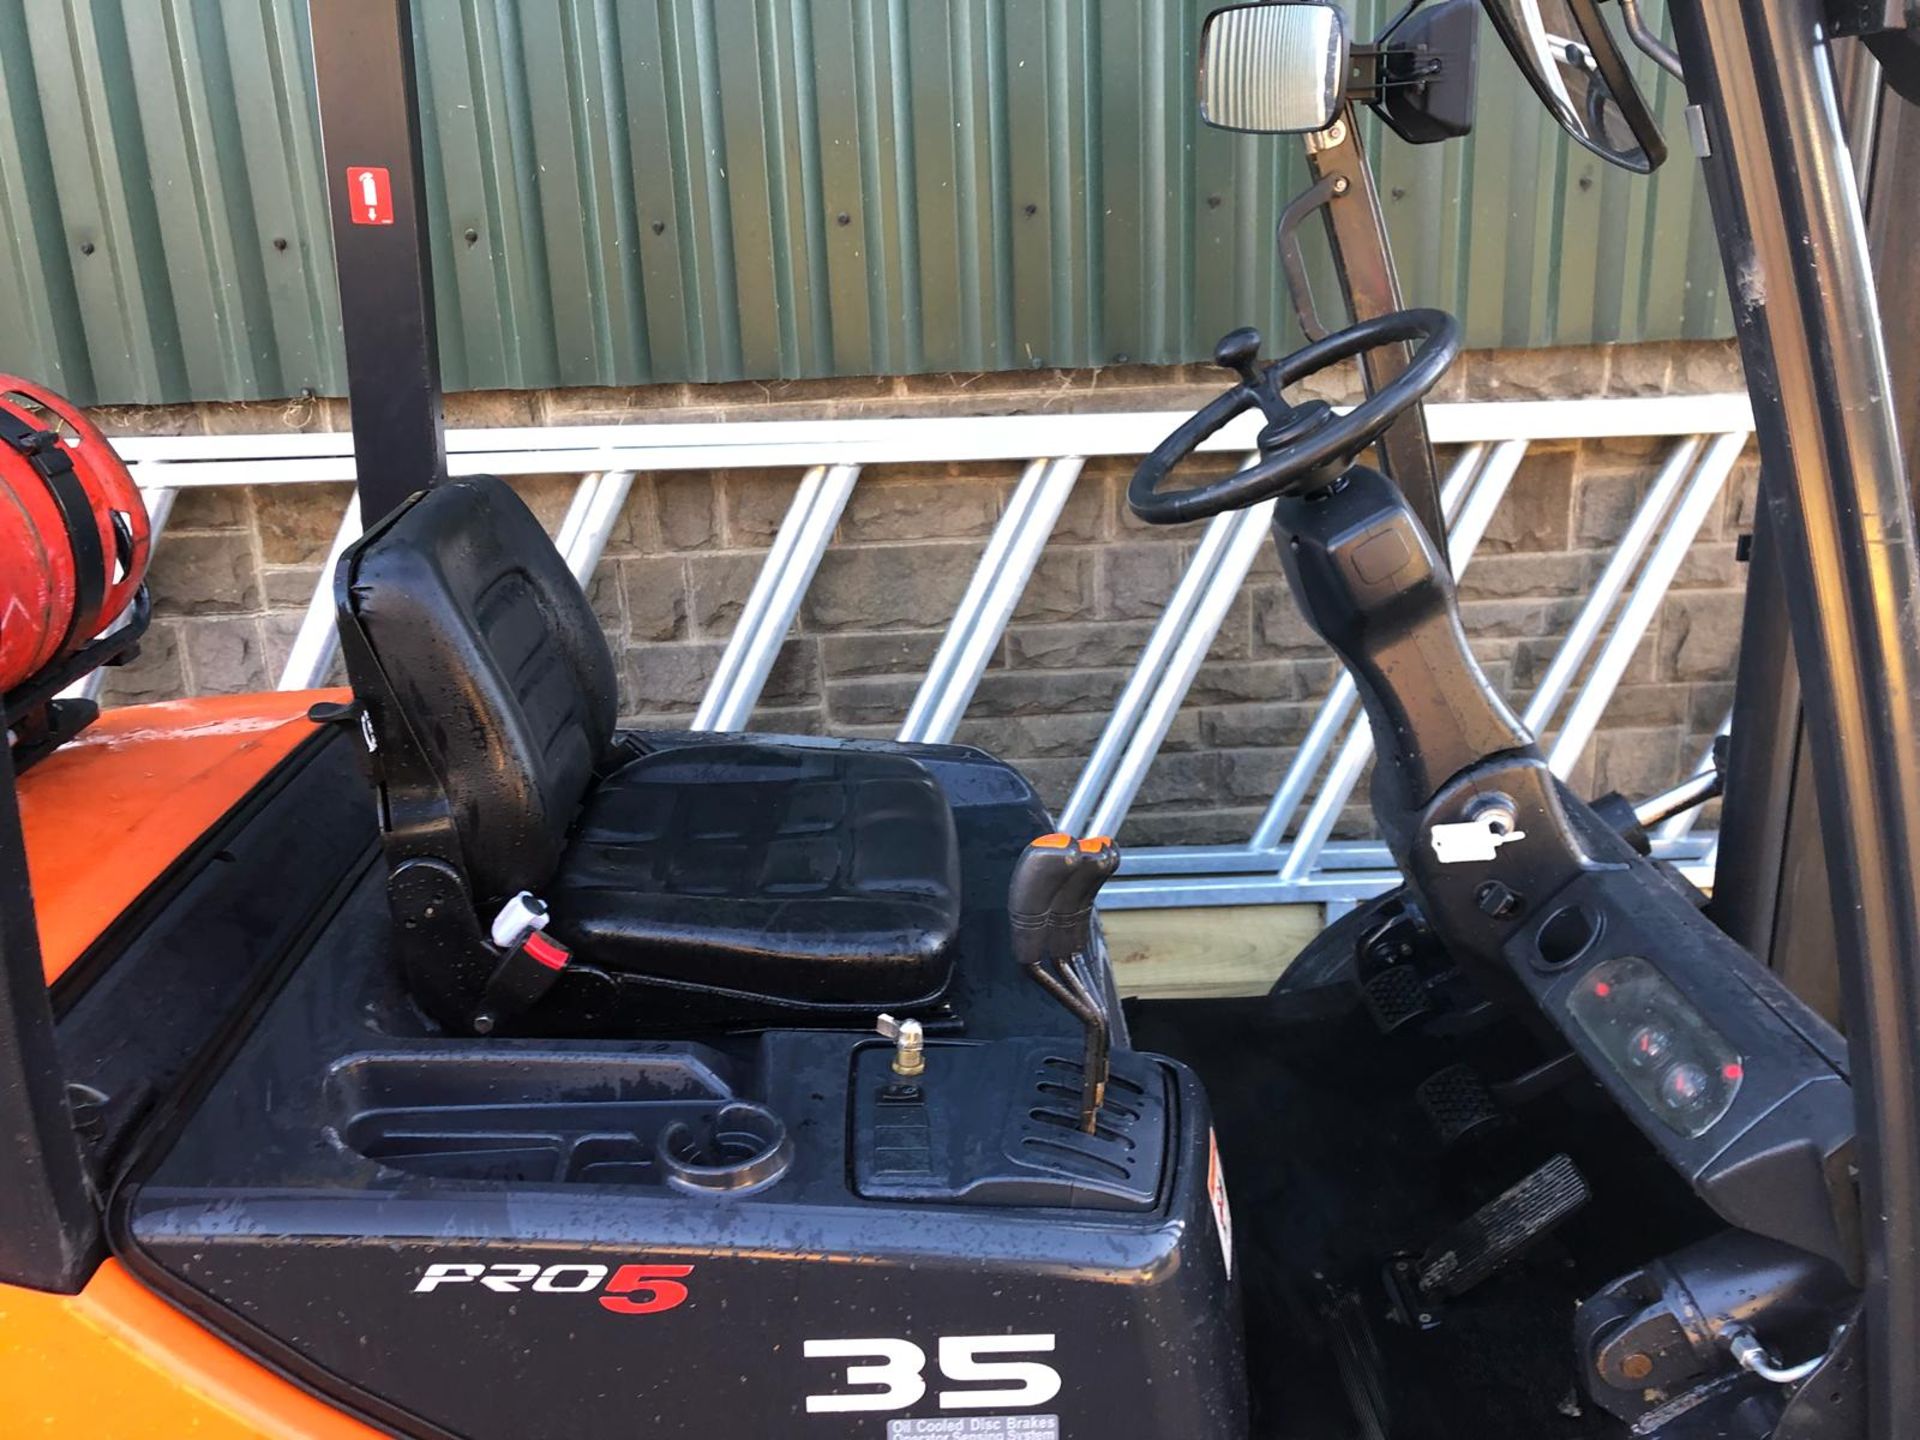 2015 DOOSAN PRO 5 G35C-5 GAS FORKLIFT WITH SIDE SHIFT, STARTS, DRIVES AND LIFTS *PLUS VAT* - Image 11 of 13